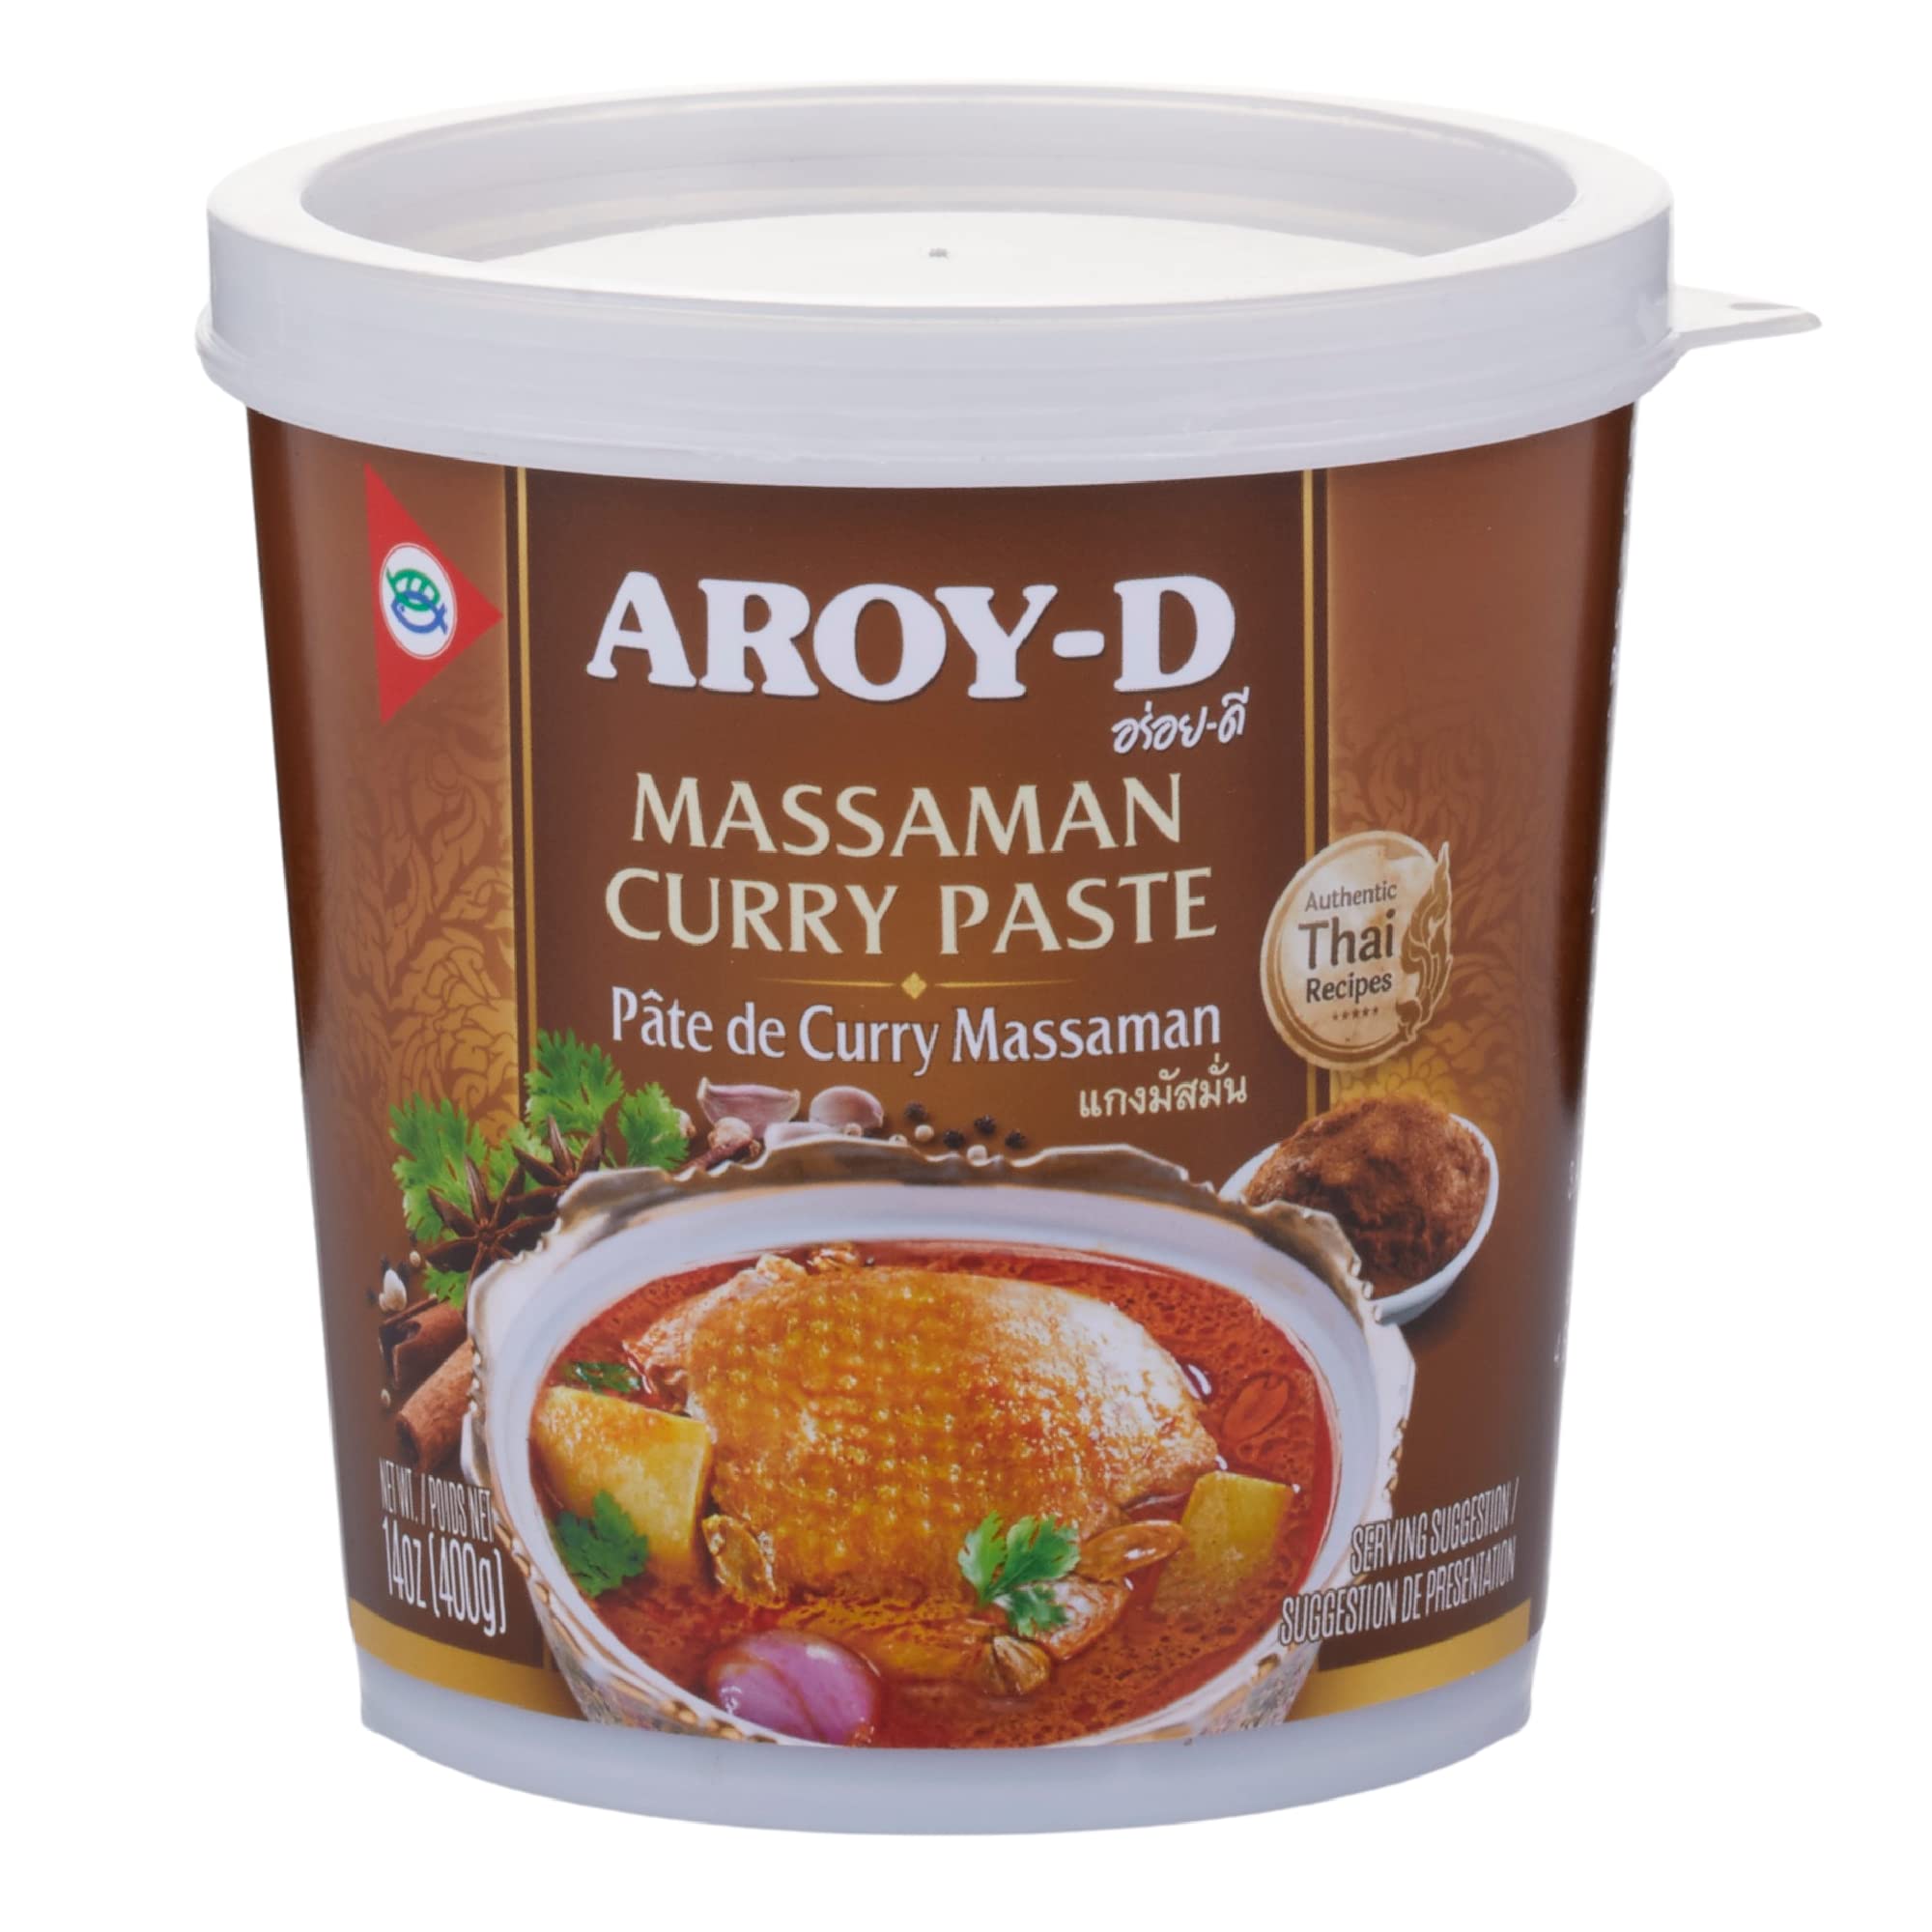 14oz Aroy D Massaman Curry Paste, Pack of 1